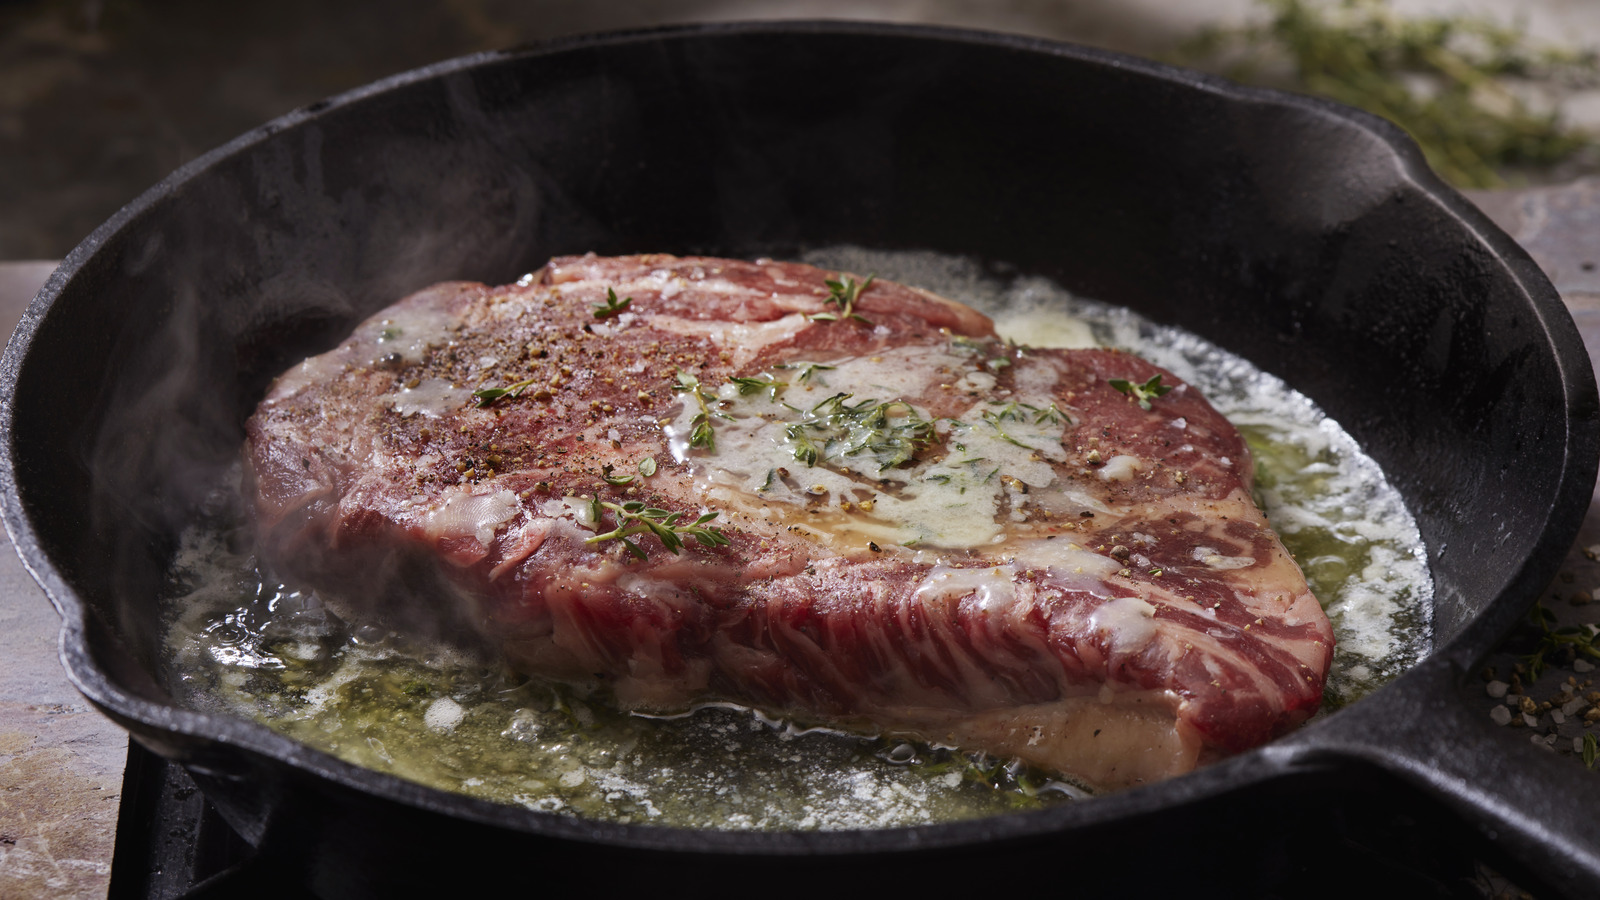 https://www.tastingtable.com/img/gallery/the-case-for-salting-the-pan-not-the-steak-for-the-ideal-crust/l-intro-1689980184.jpg